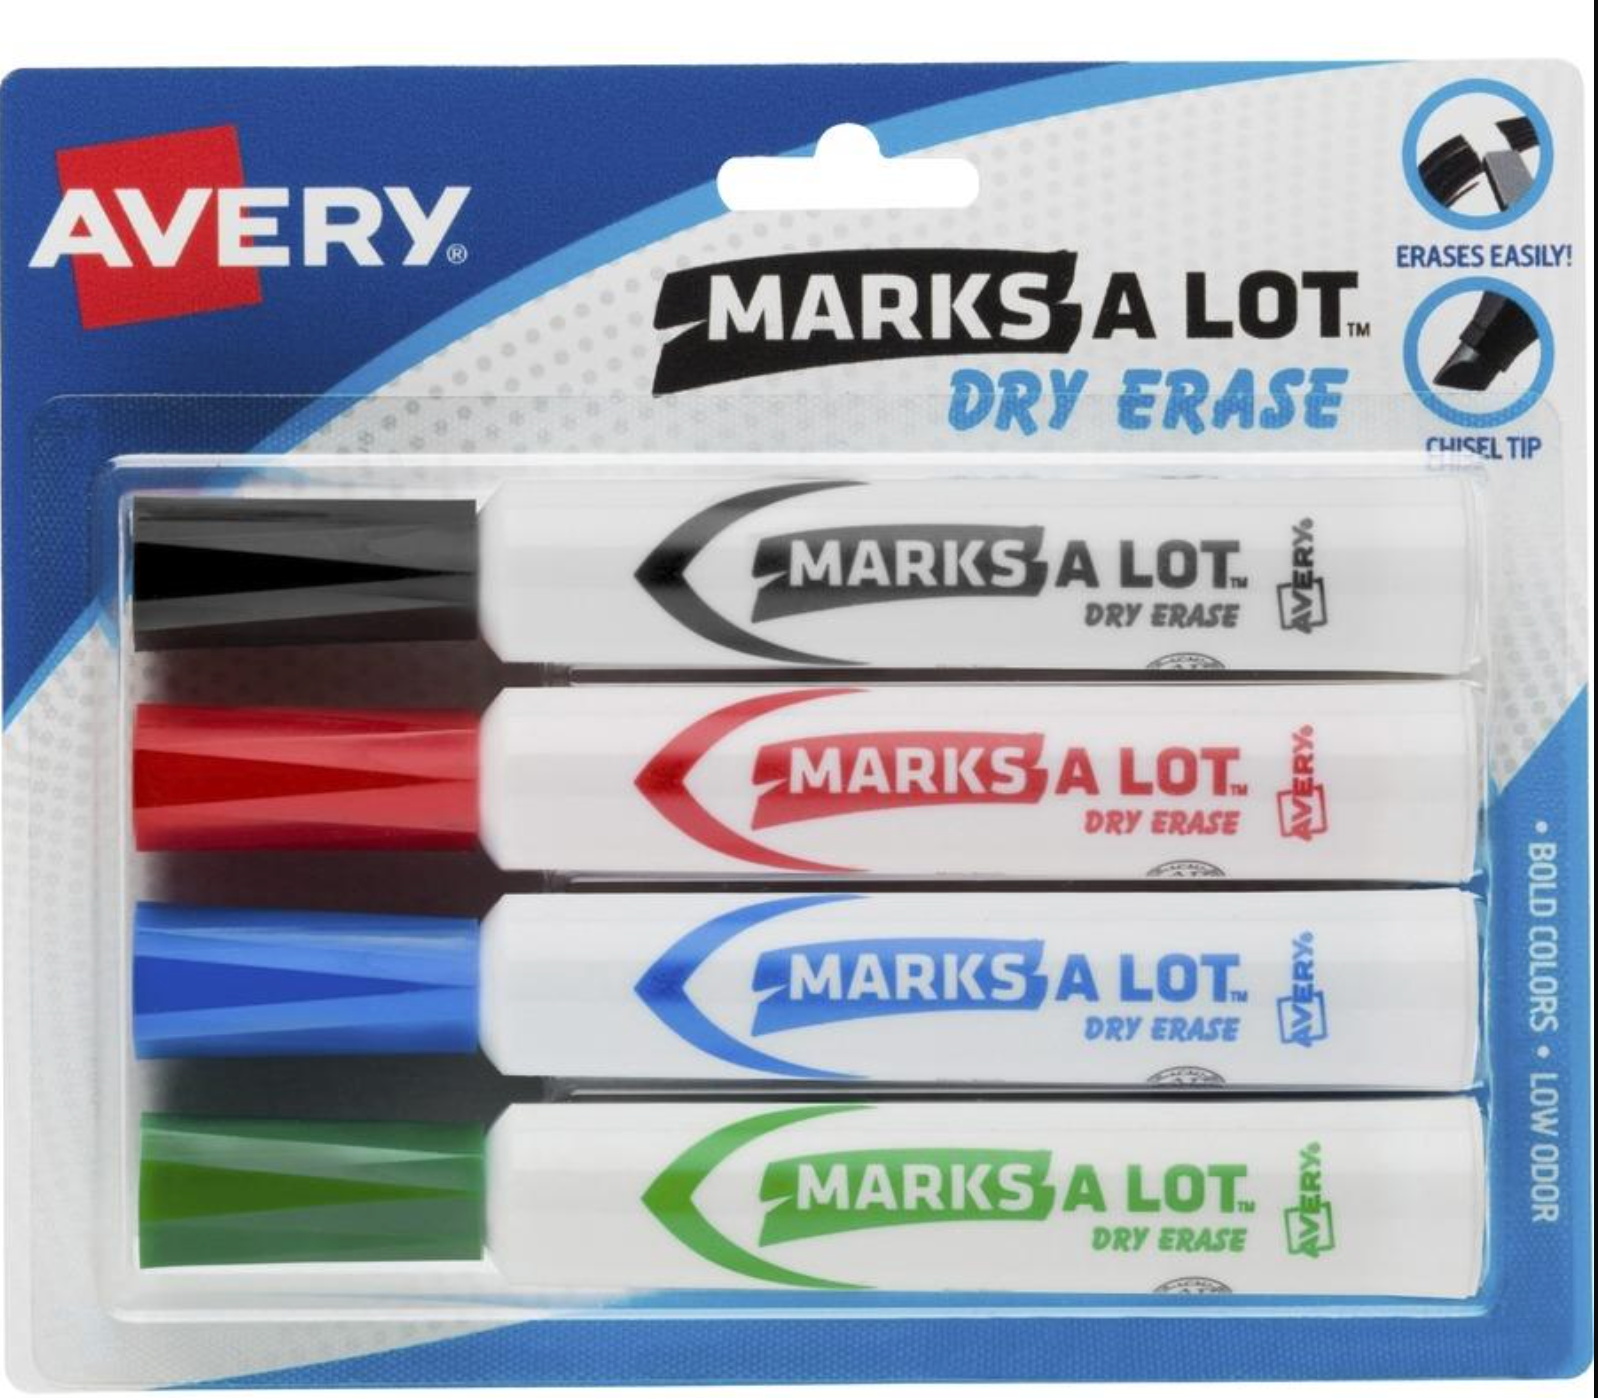 Avery® Marks A Lot Desk-Style Dry-Erase Markers- 4 pack